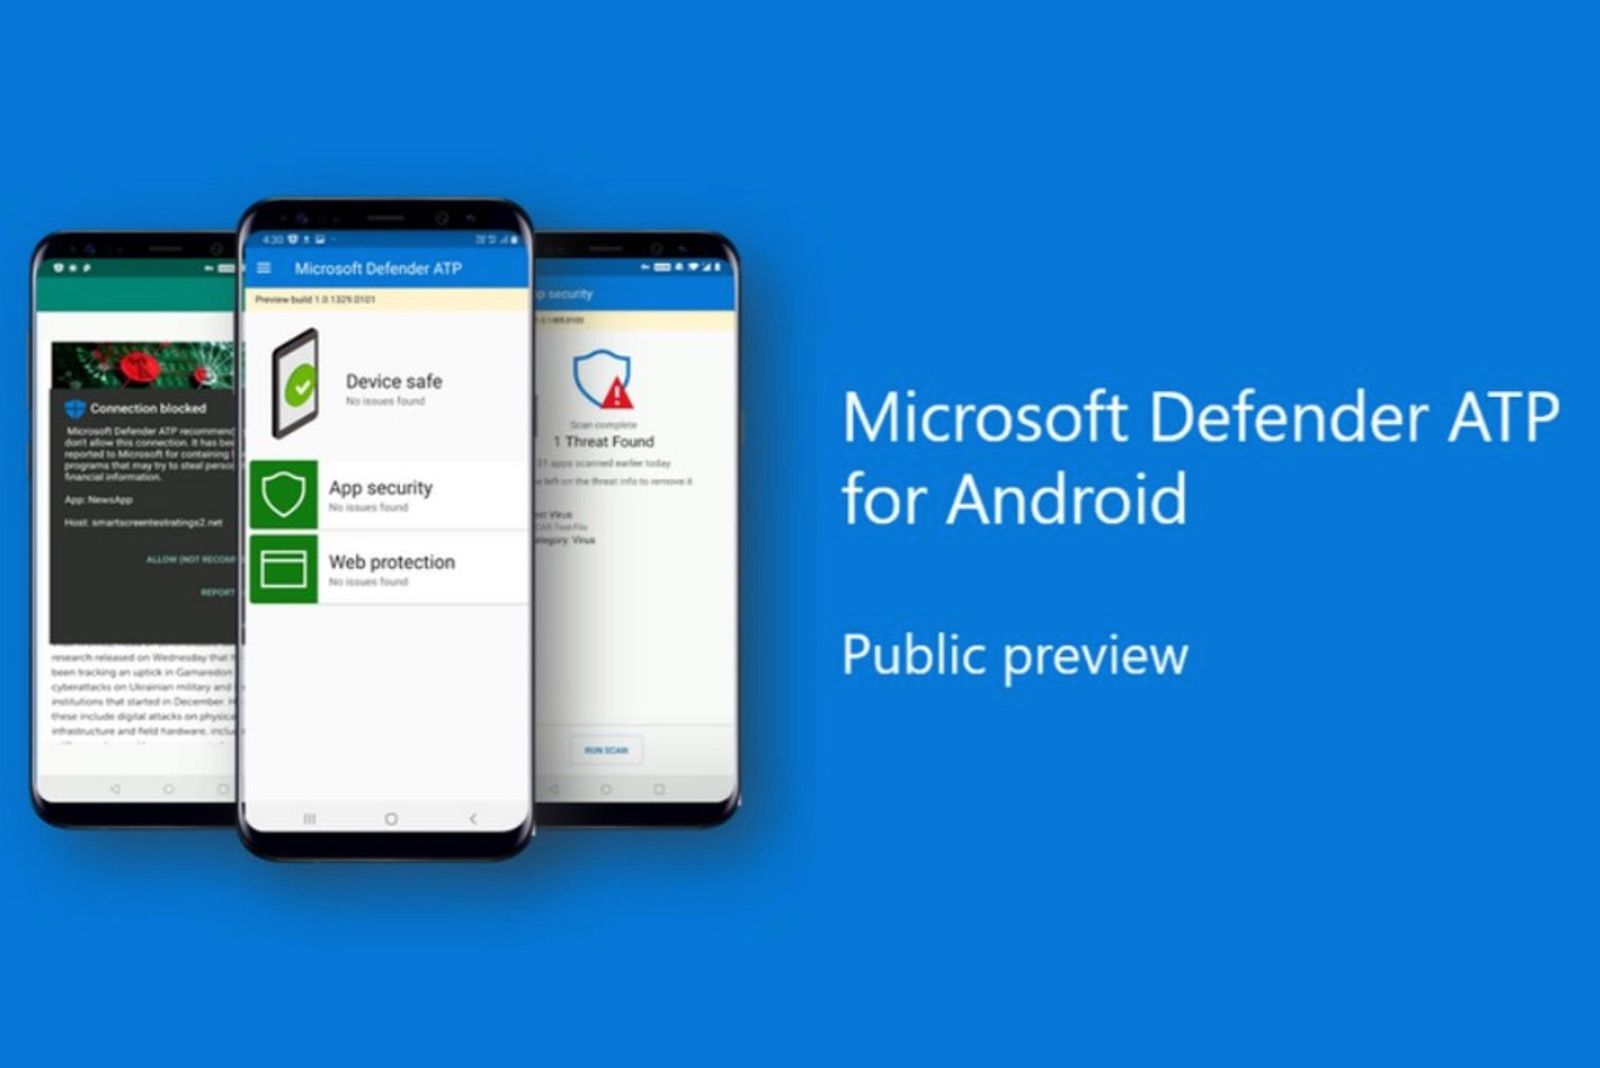 Microsoft launches its Defender antivirus app for Android in preview image 1